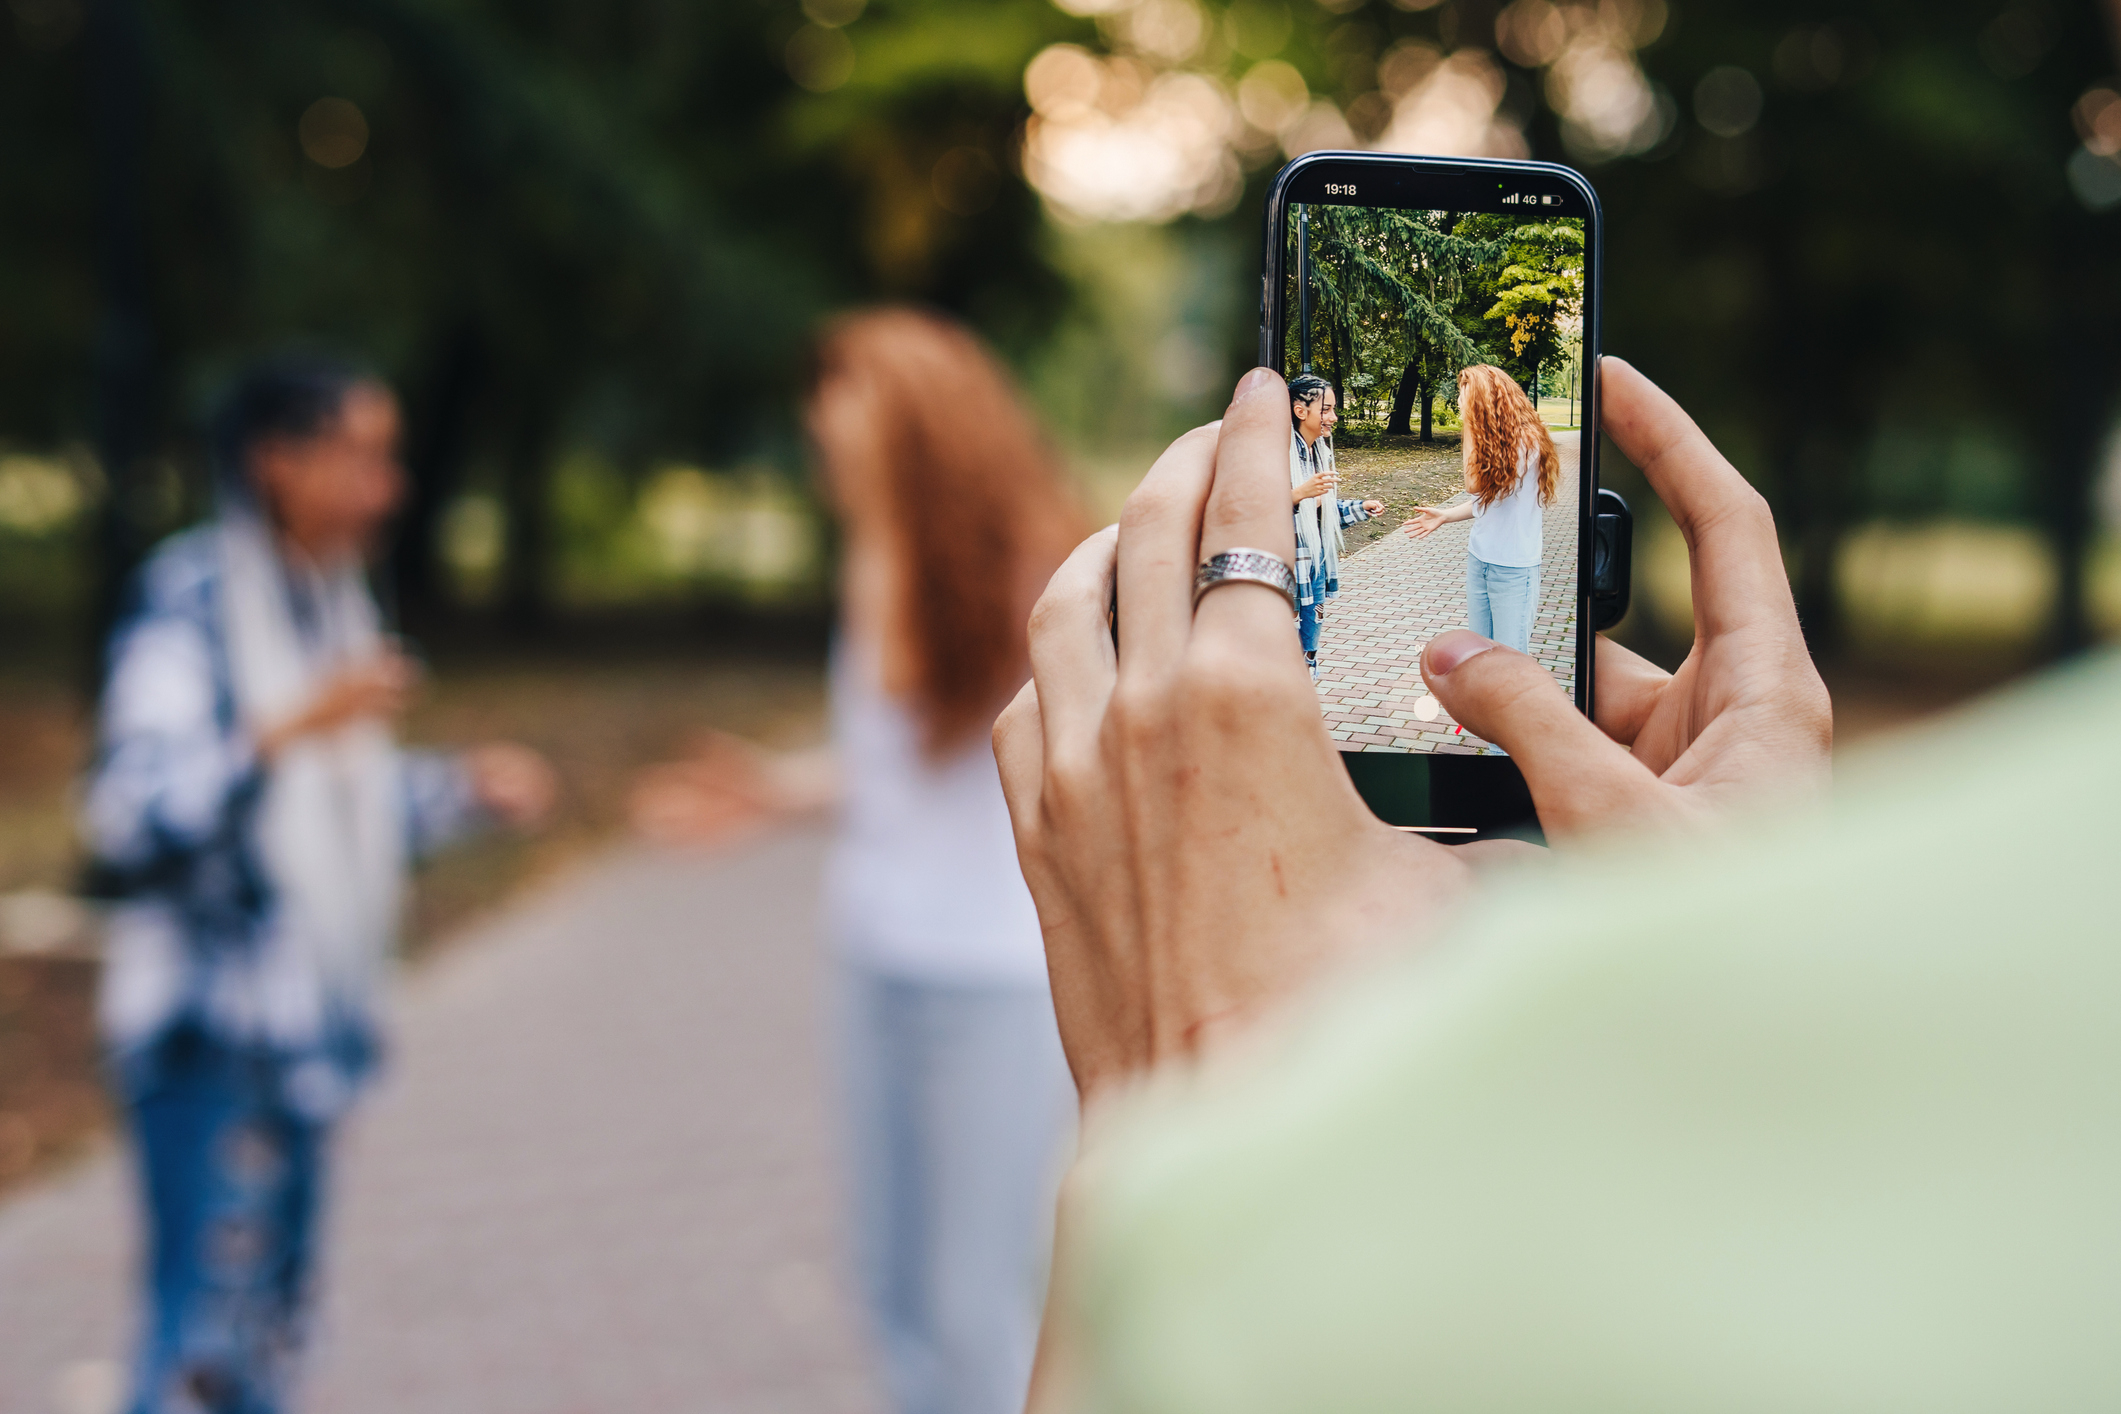 Person takes photo of two others walking in a park on a smartphone